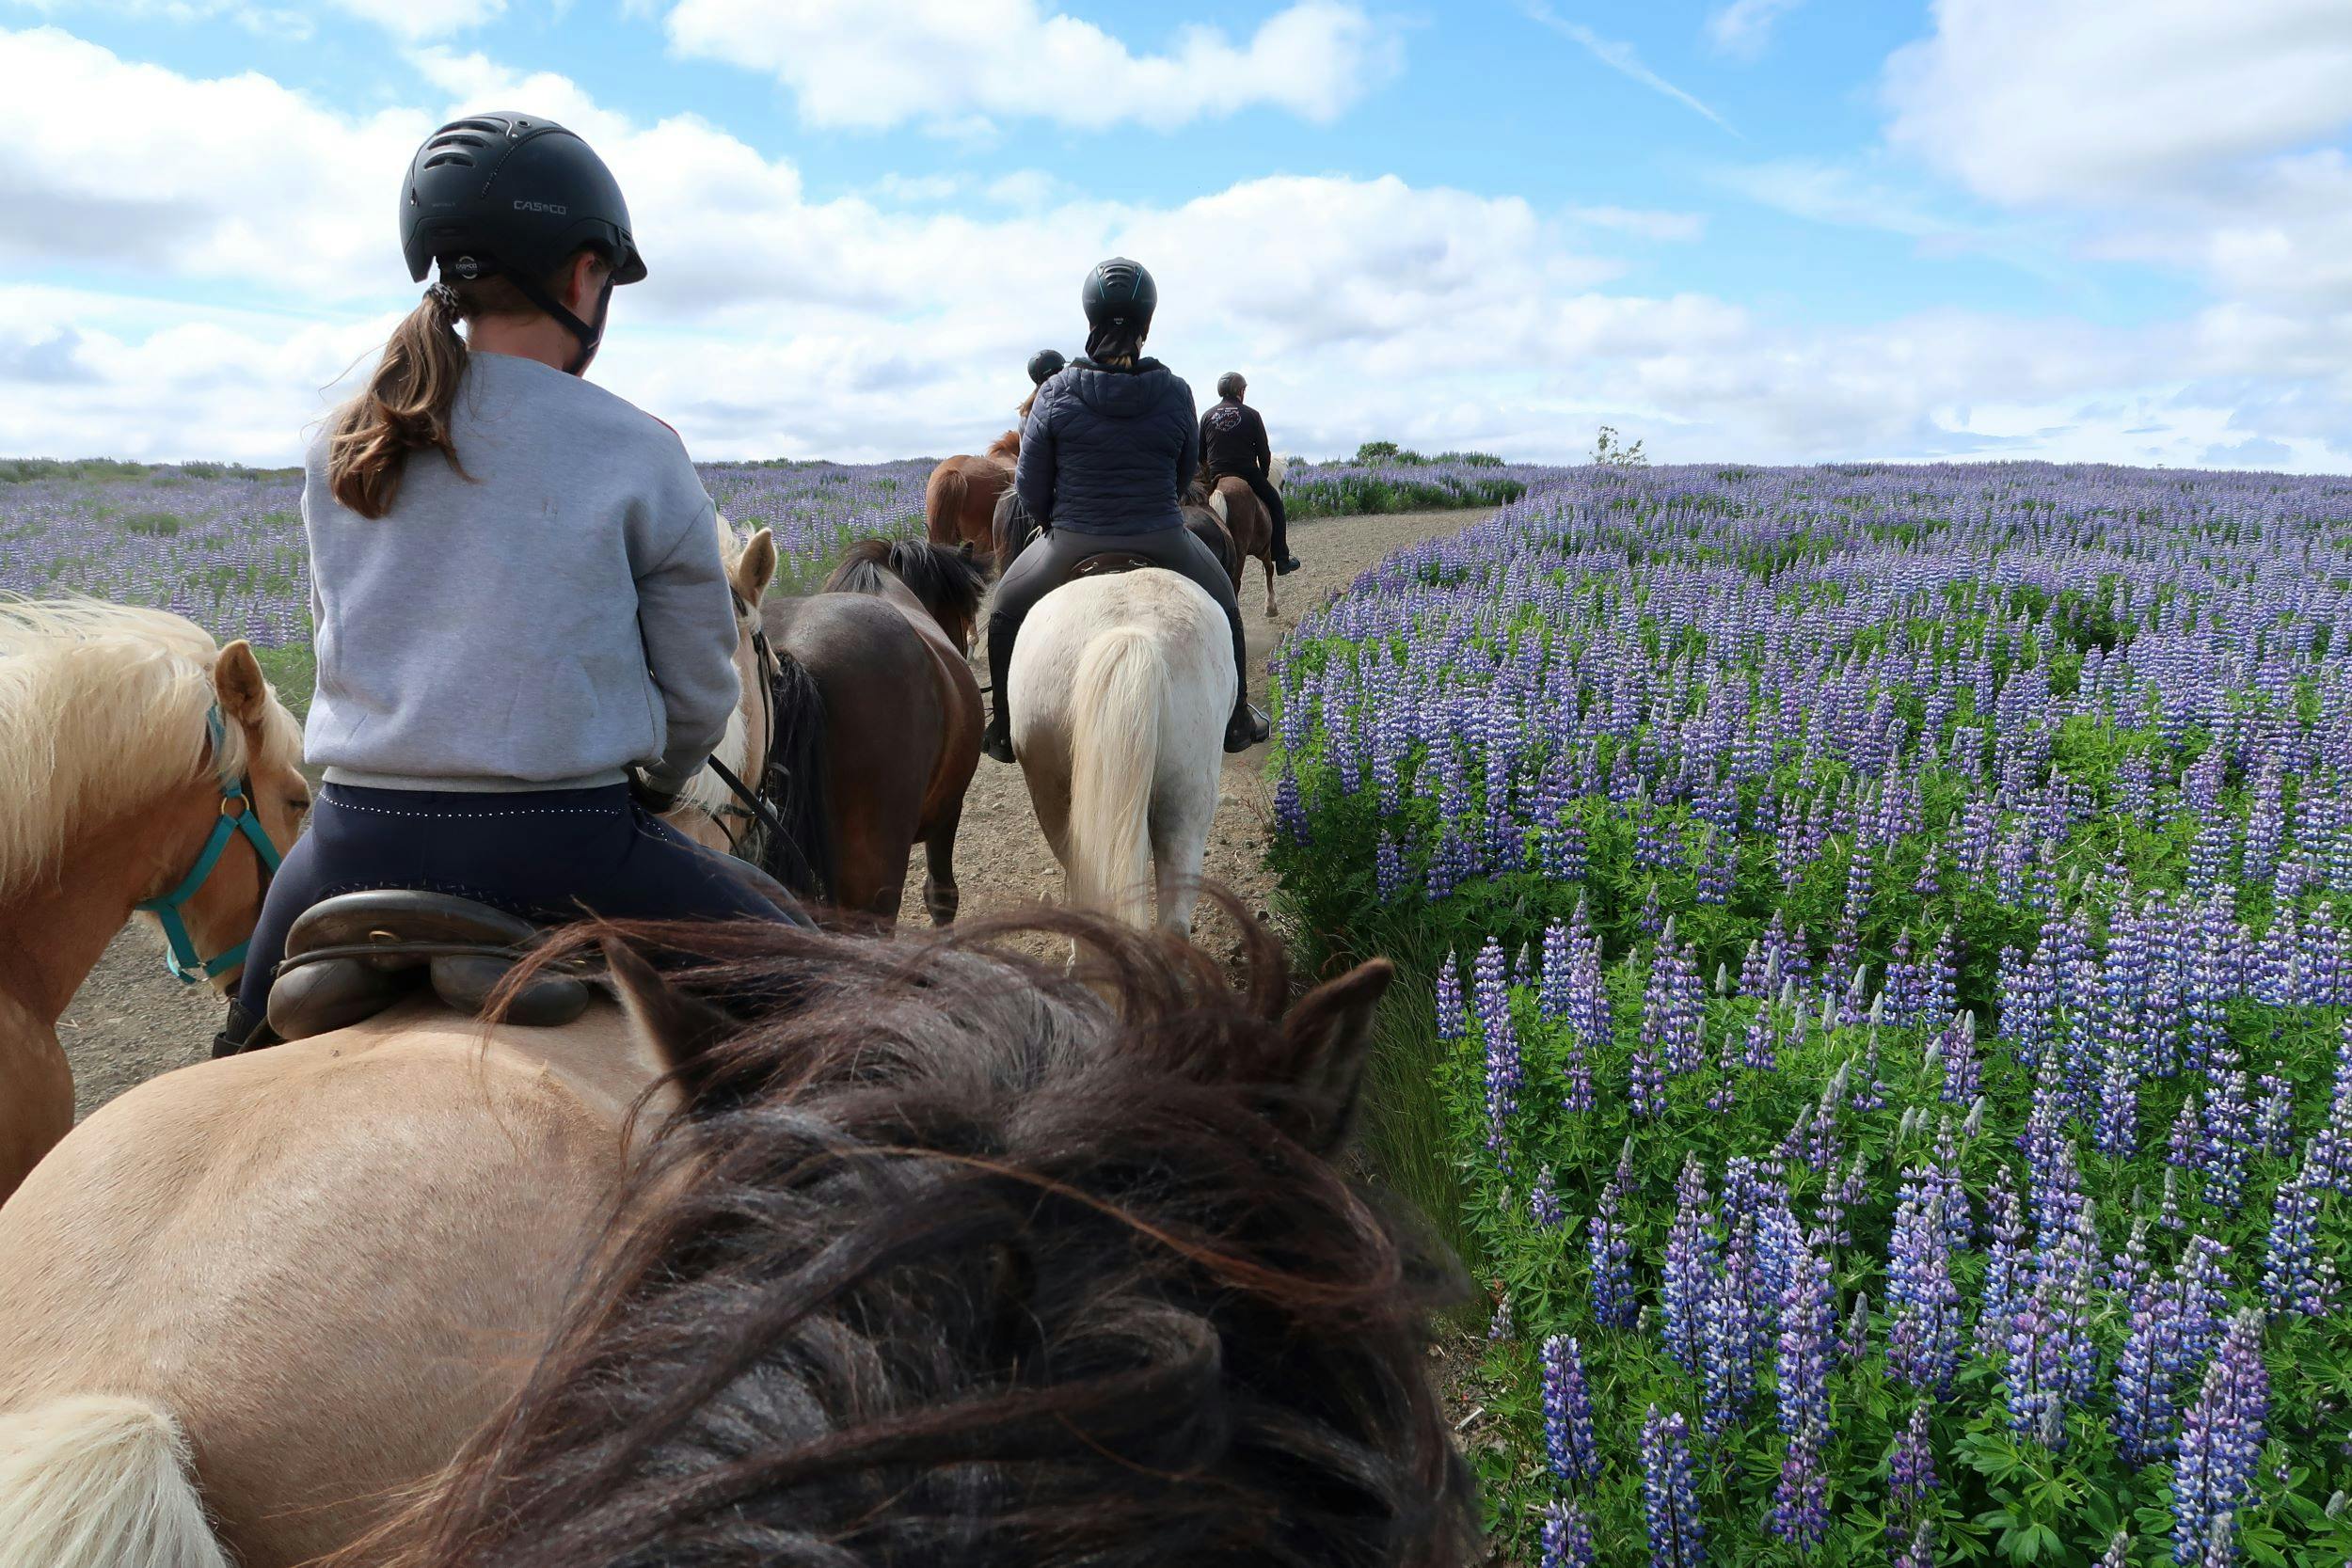 A group of riders ride along a path that is leading through a field of blooming lupines